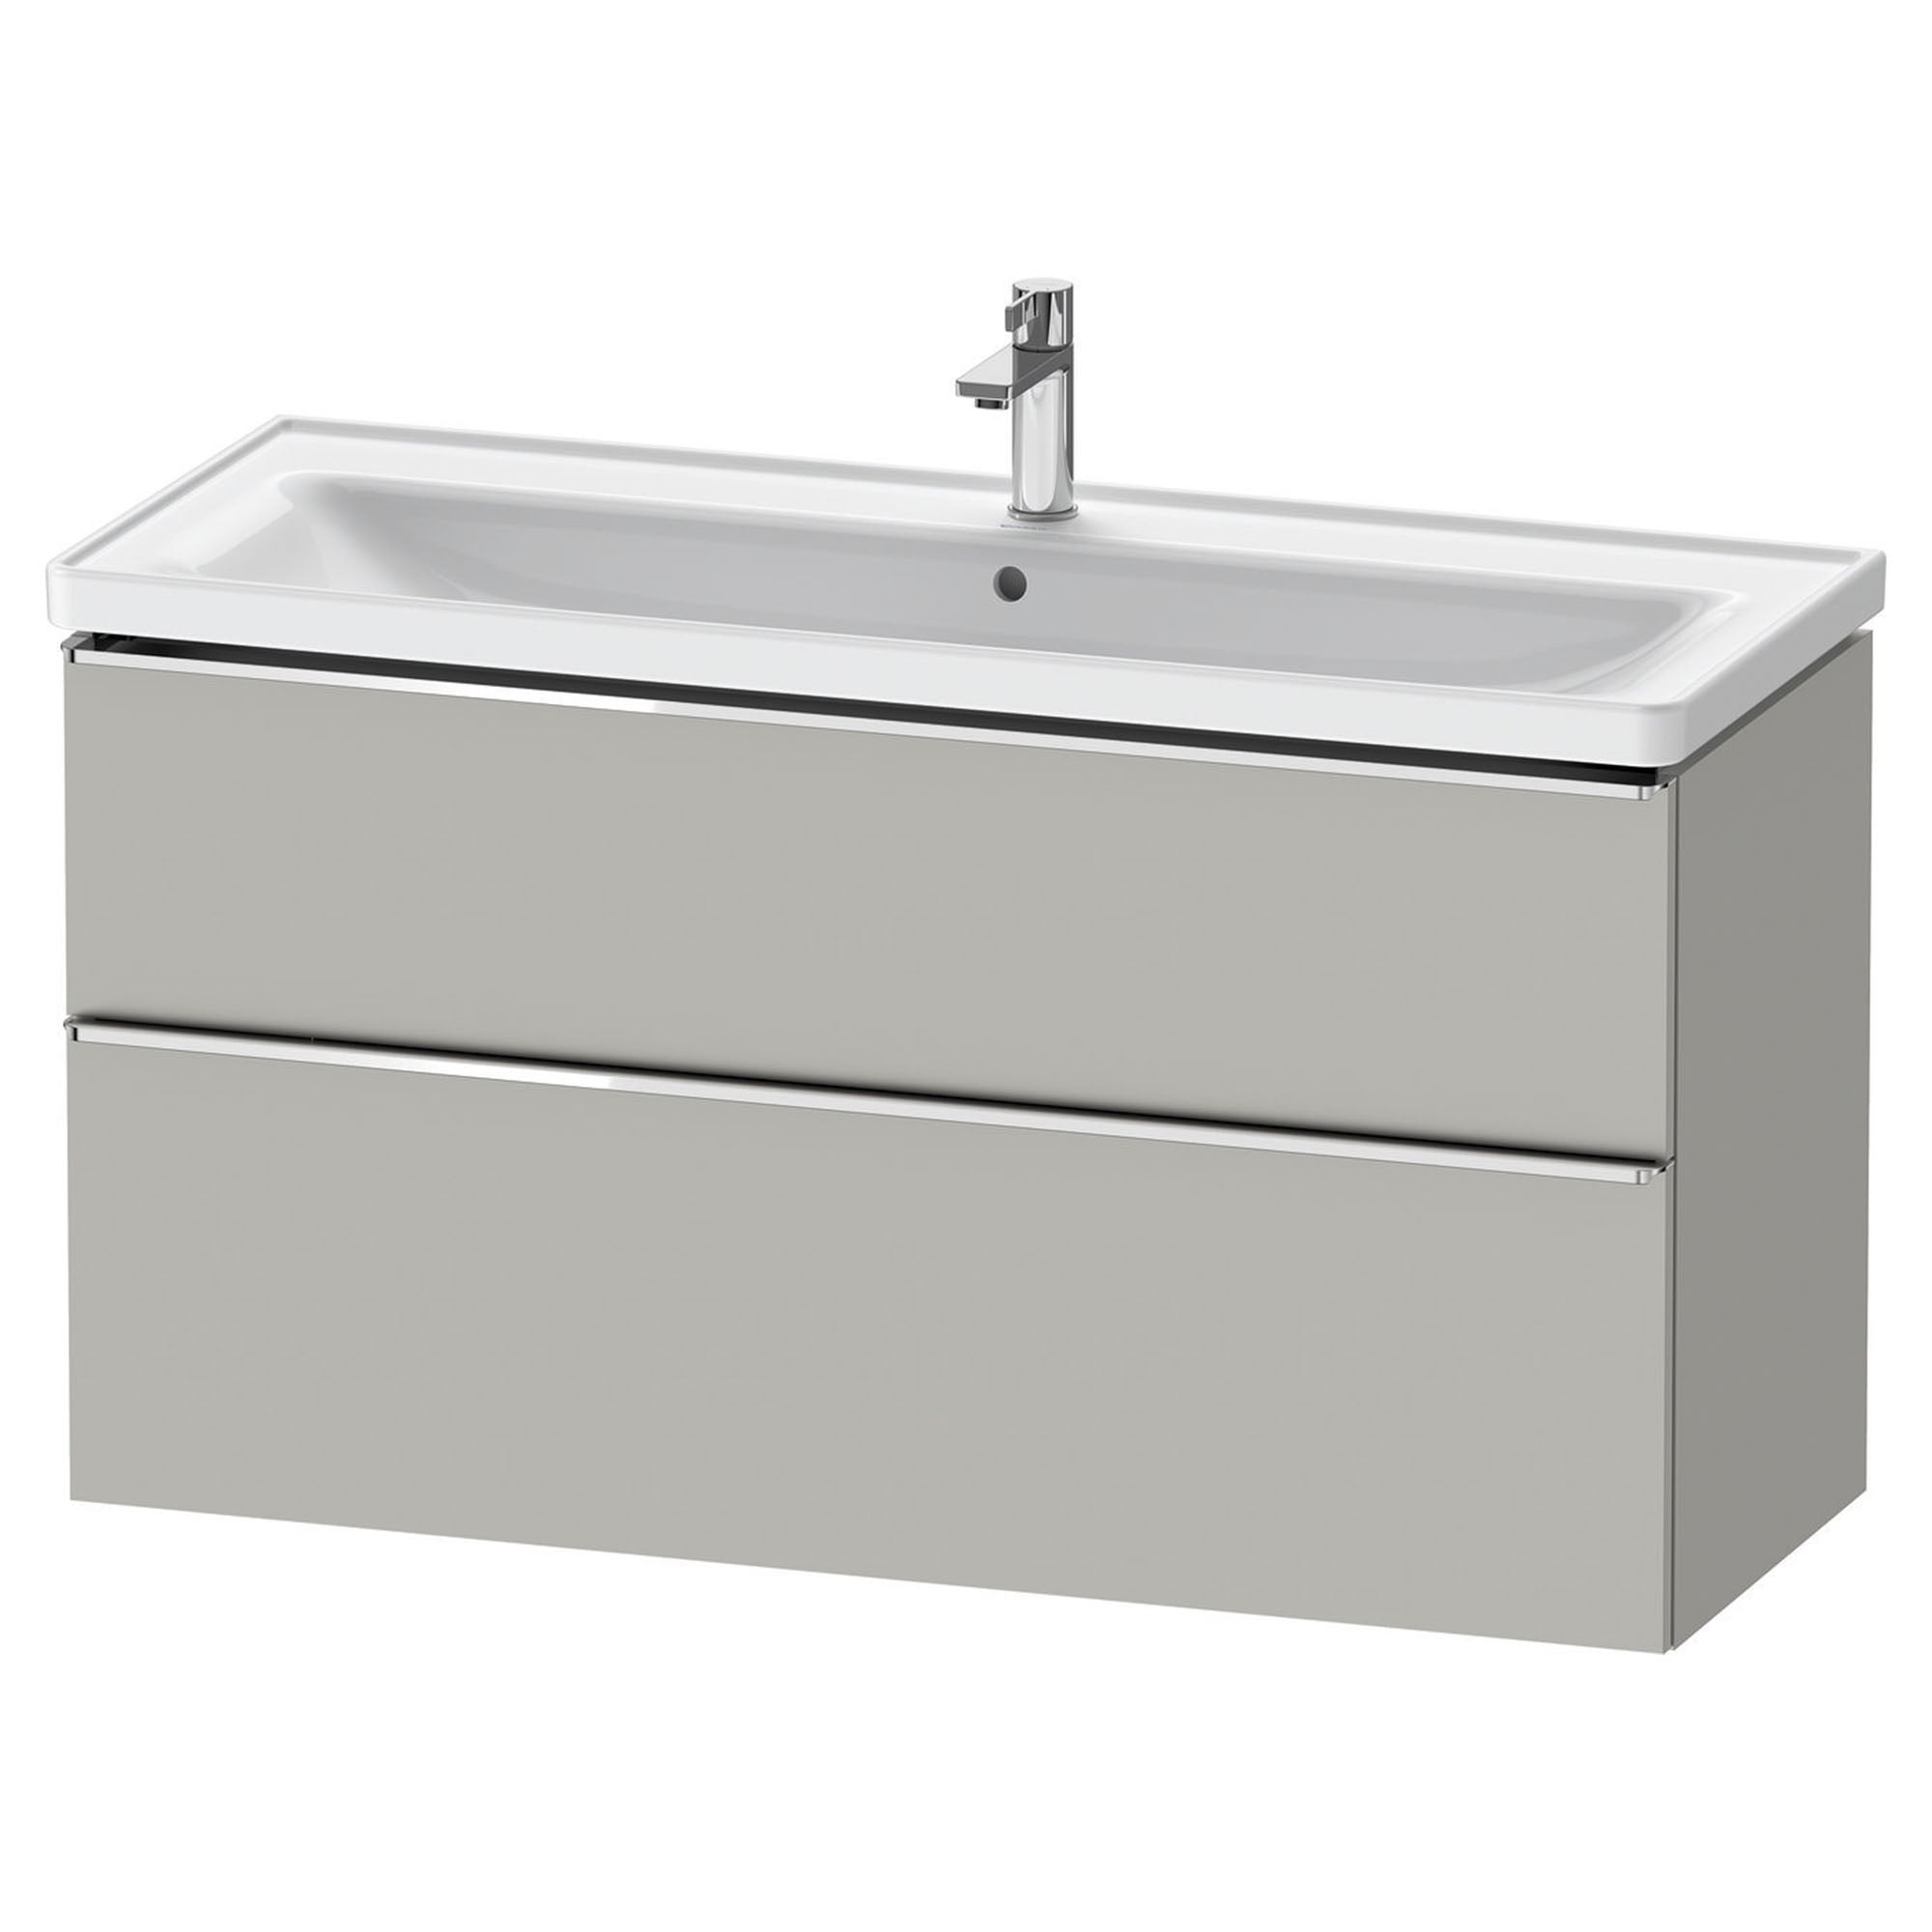 duravit d-neo 1200mm wall mounted vanity unit with d-neo basin concrete grey chrome handles